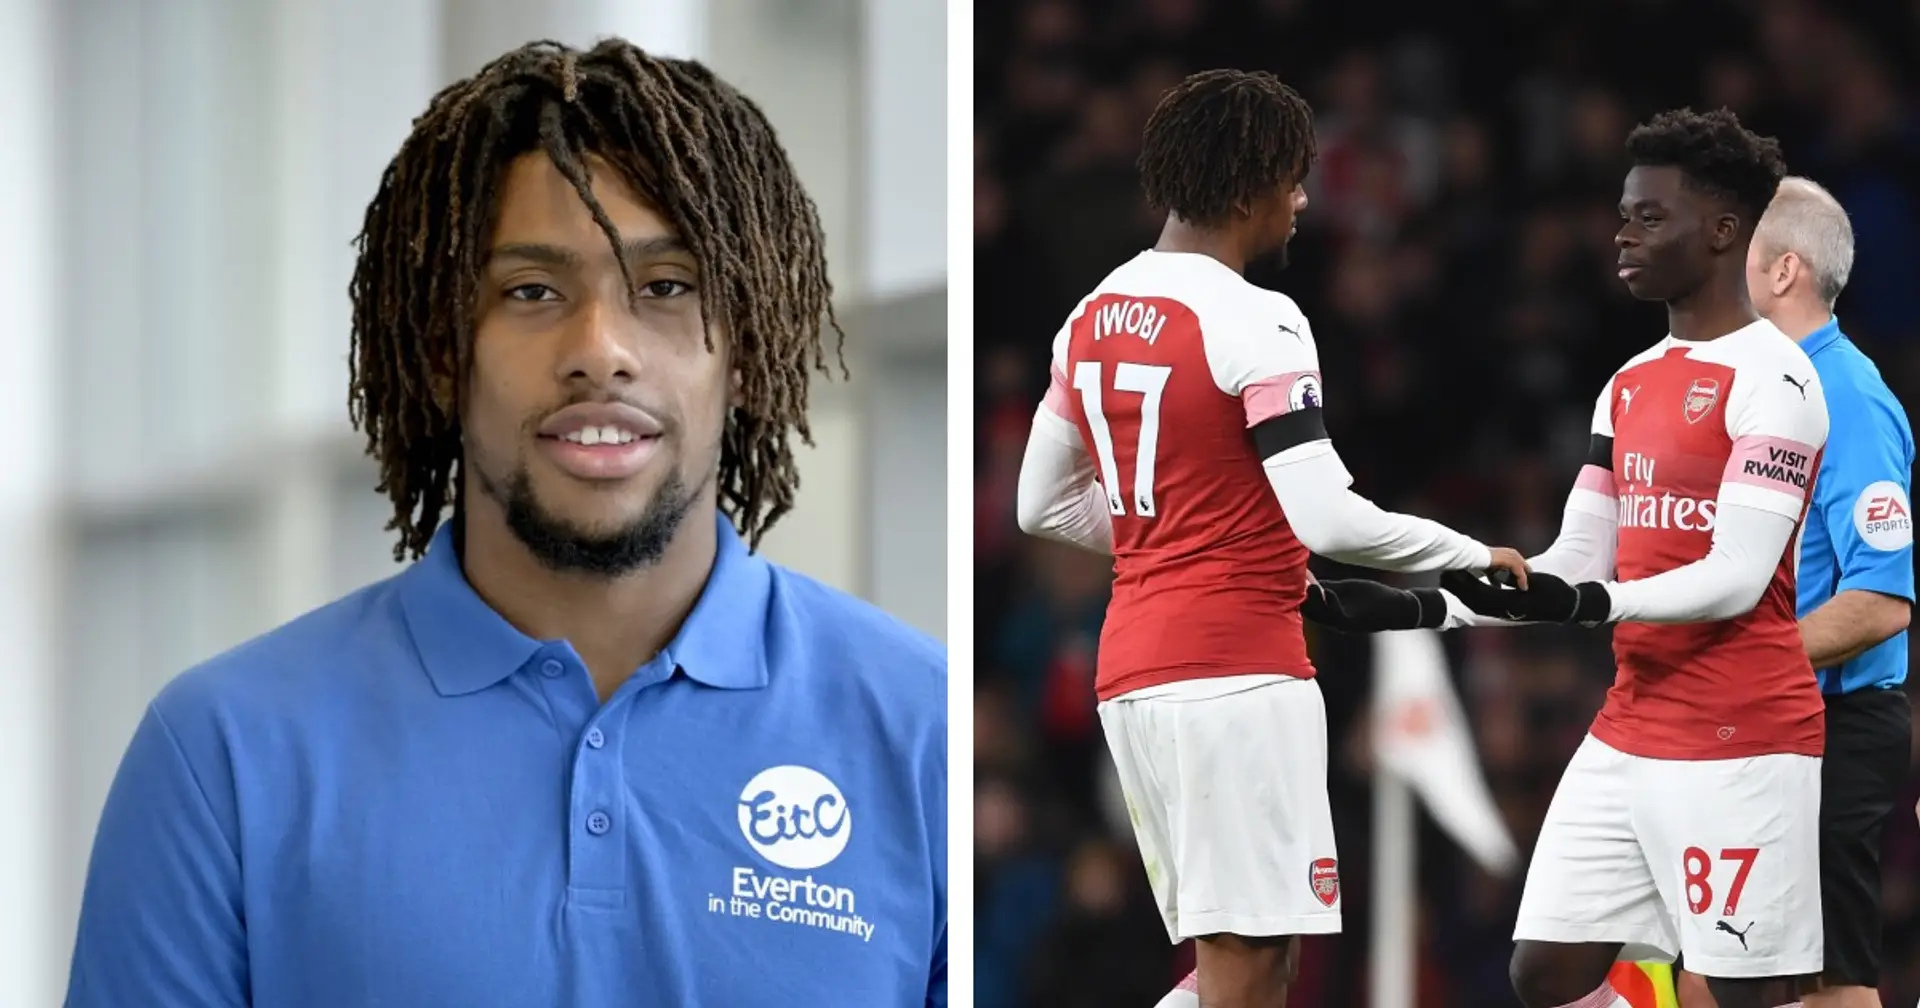 'He’s doing it on a consistent basis now': Iwobi explains why older Arsenal players were offended by Saka